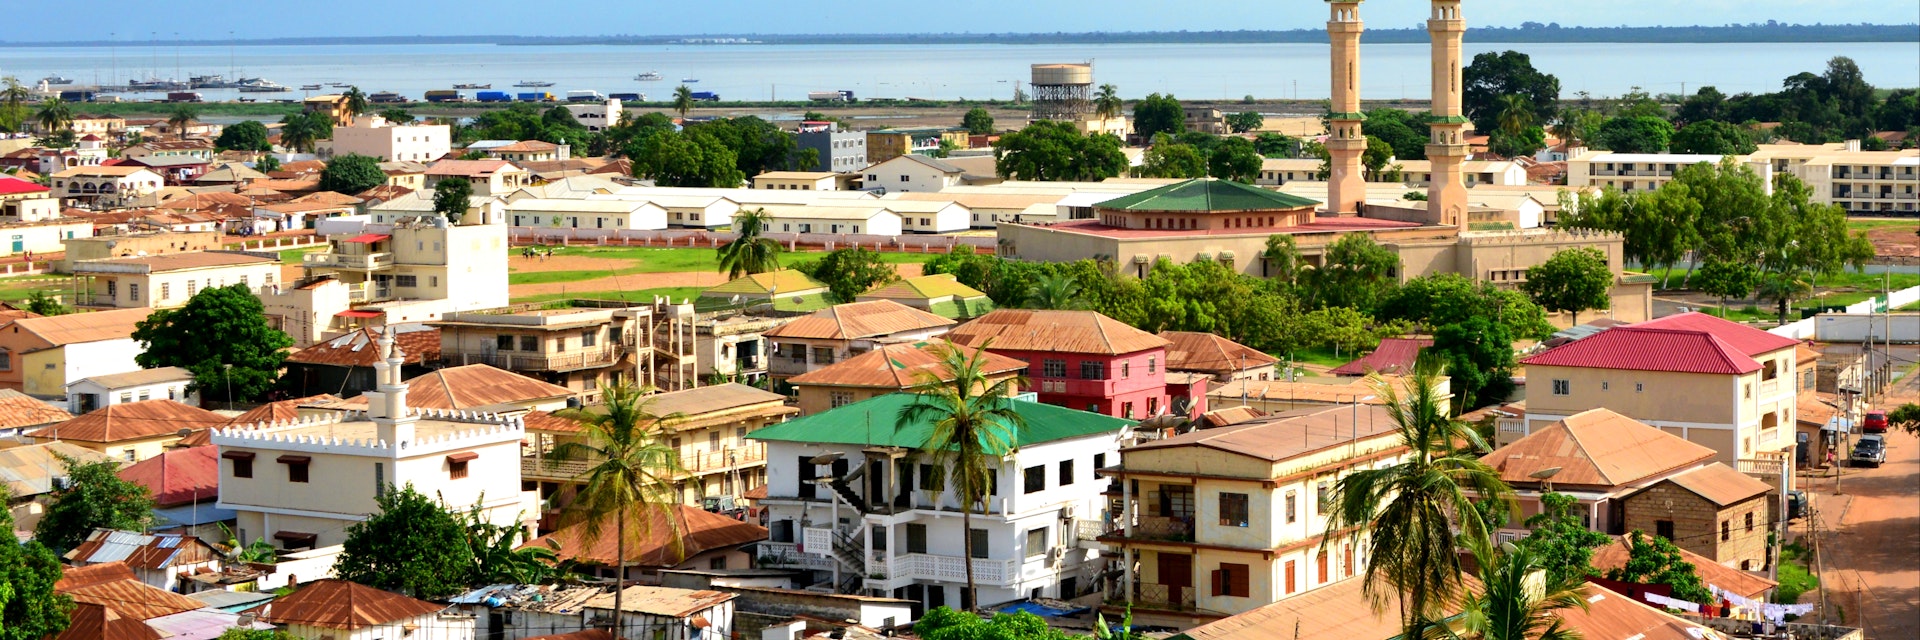 Skyline of the low-rise Gambian capital with the River Gambia and the minarets of King Fahad Mosque on the right.